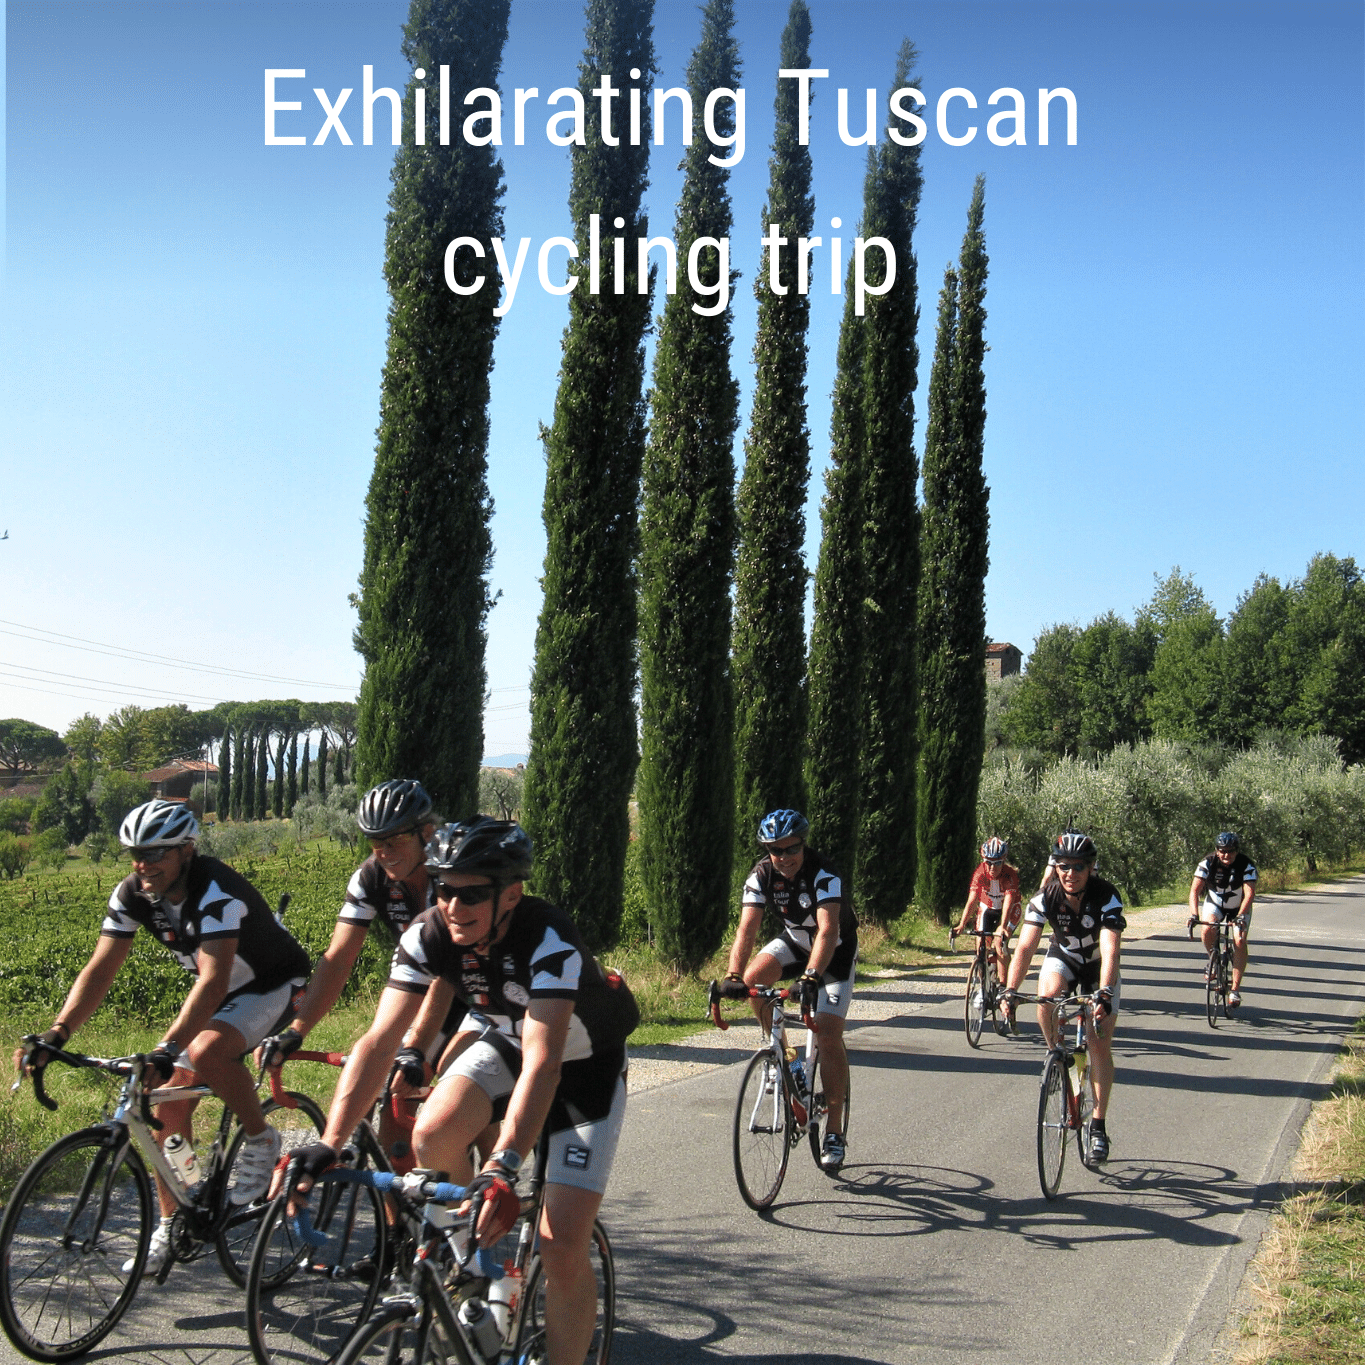 Lucca and cycling trip